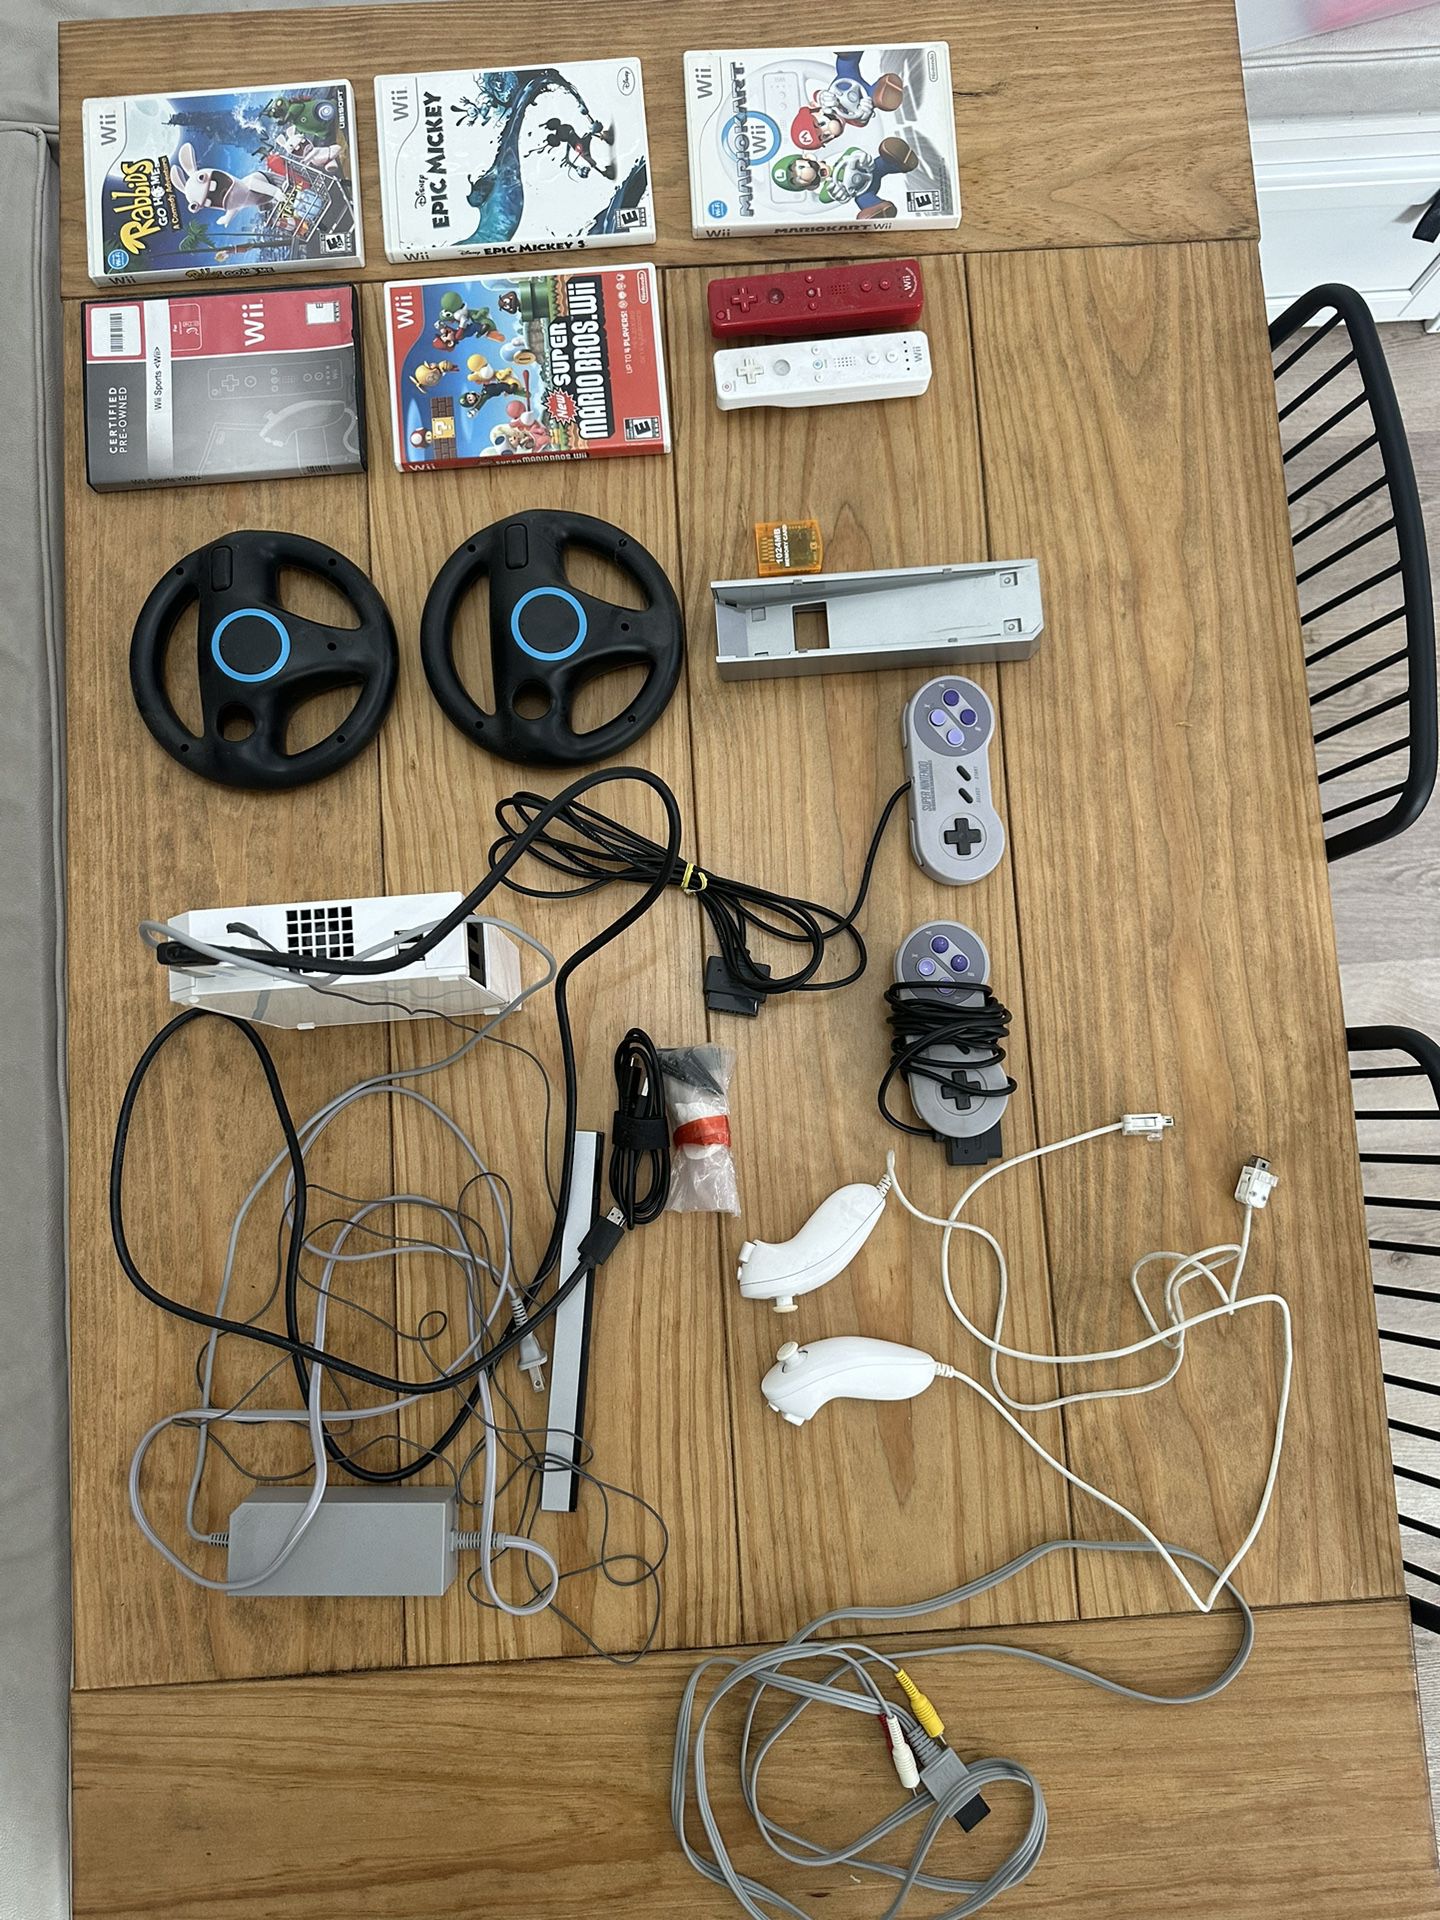 Nintendo Wii Console With Games and Accessories HDMI cable & converter Included